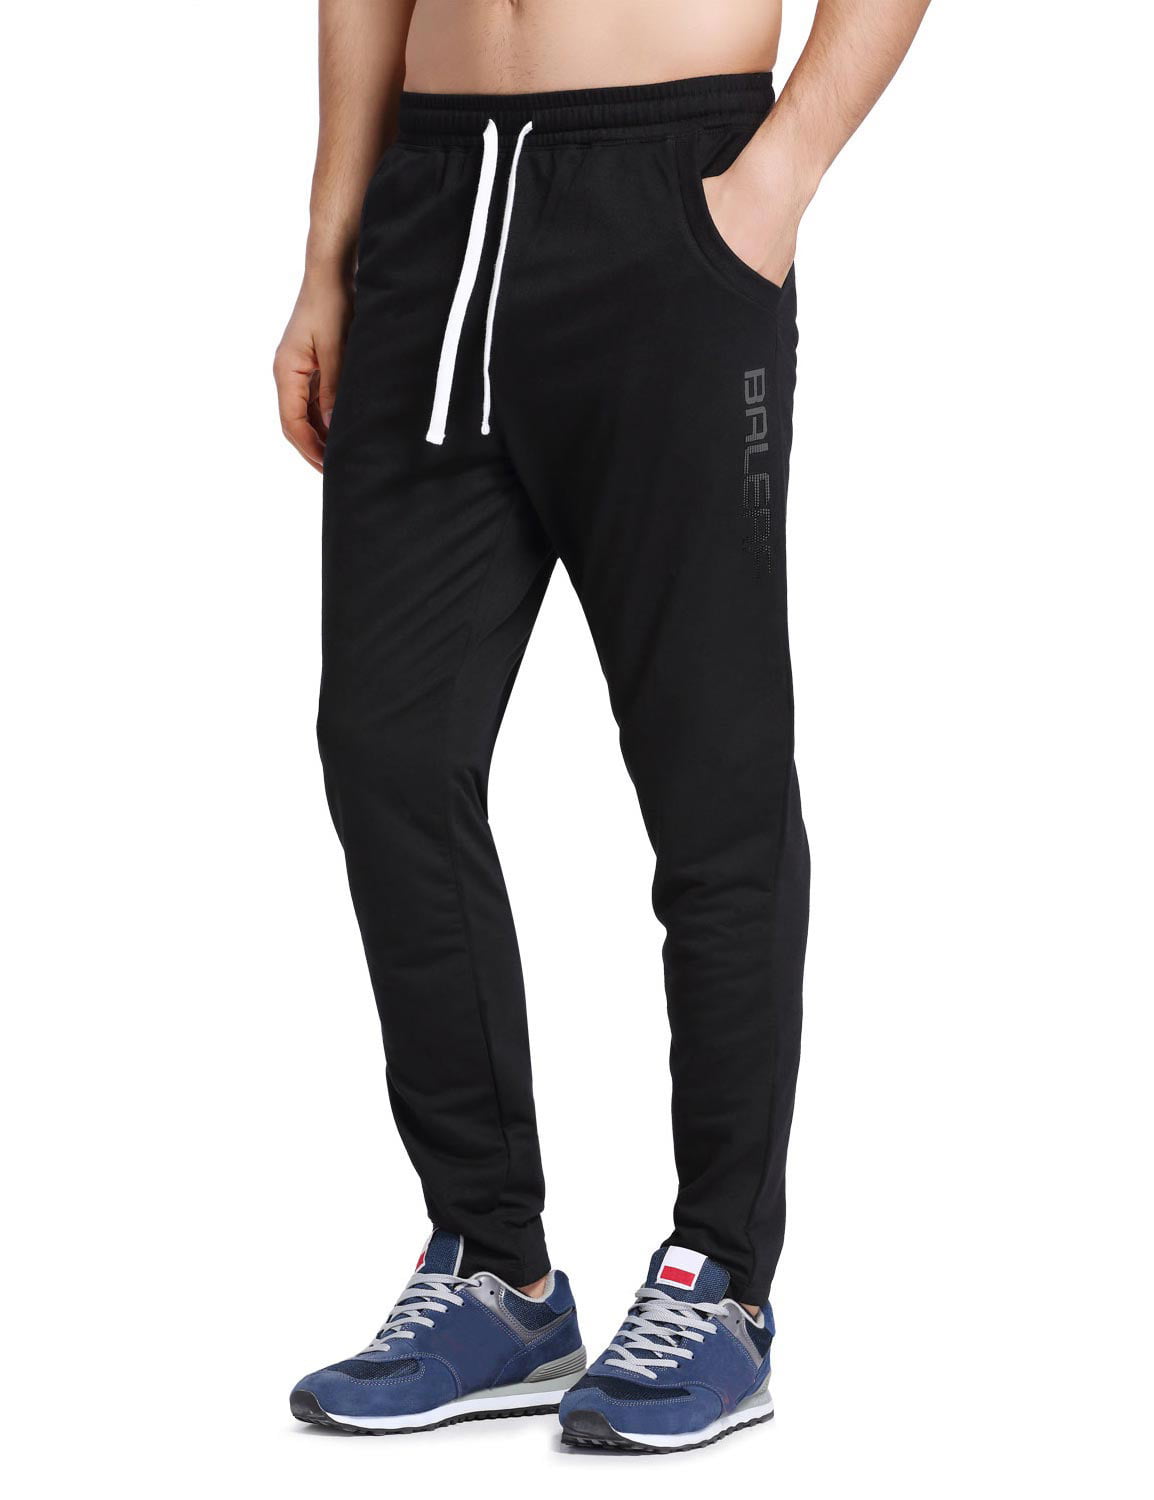 BALEAF Mens Running Pants Workout Training Jogger Lightweight Quick Dry with Pockets